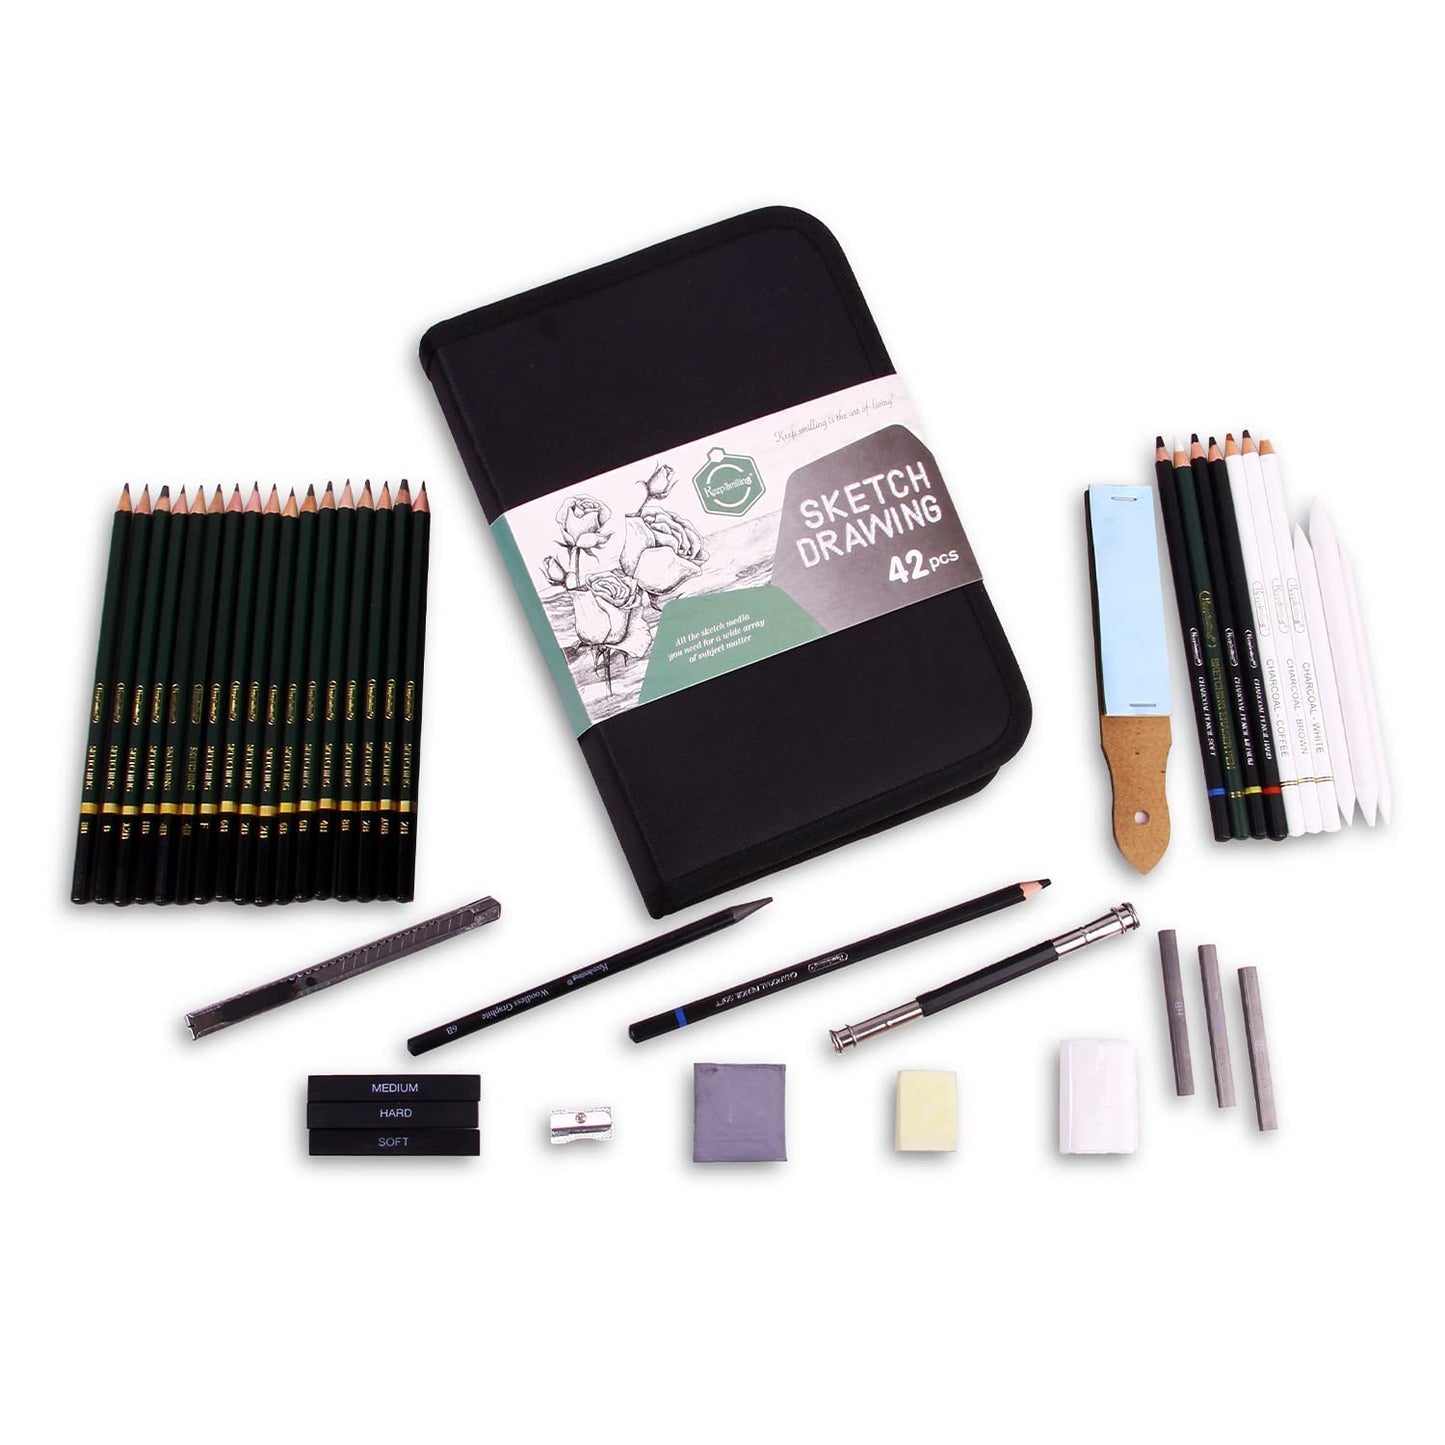 ART & CRAFT 42 Pcs. Professional Art Sketching Kit Graphite Charcoal Drawing Pencil Set for Artist Kit Painting Shading Sketch Kit for Kids and Adults with Zipper Carry Case